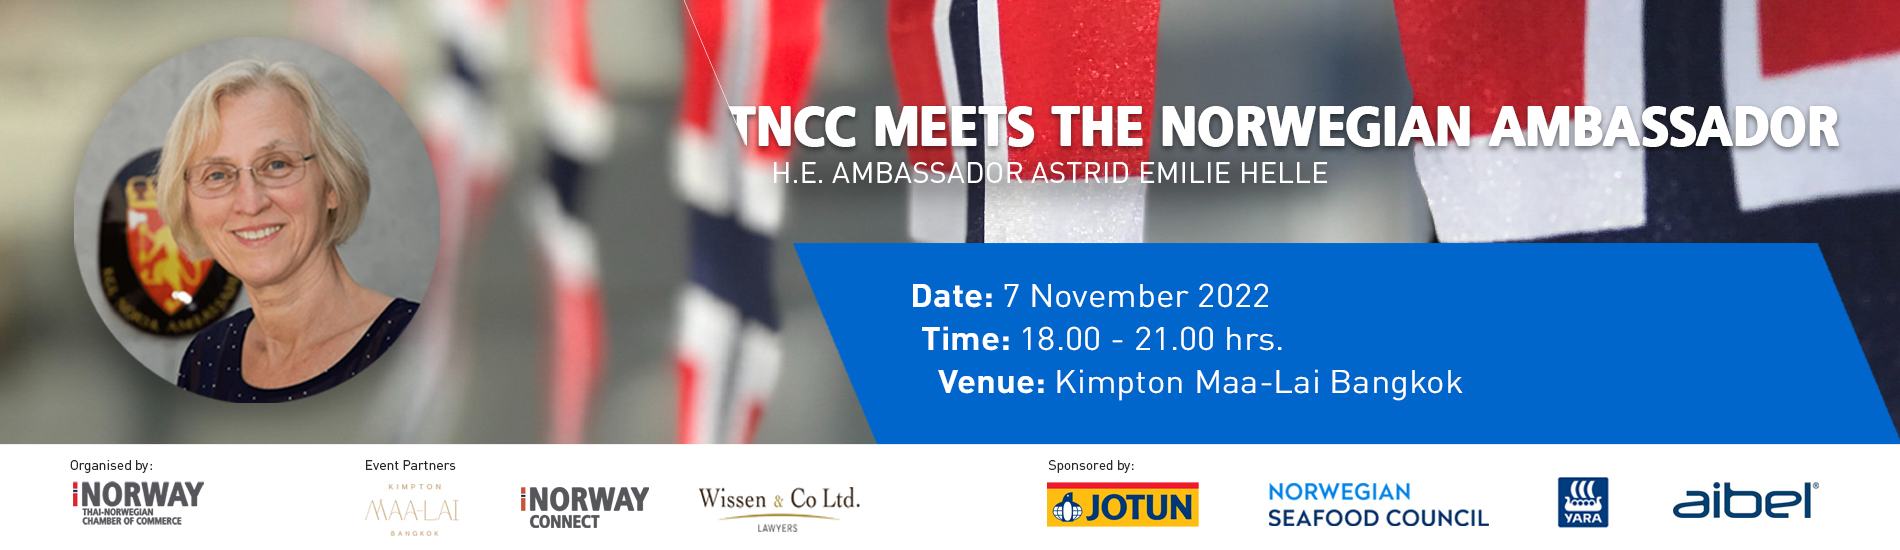 Thank you for Registering to TNCC Meets Norwegian Ambassador